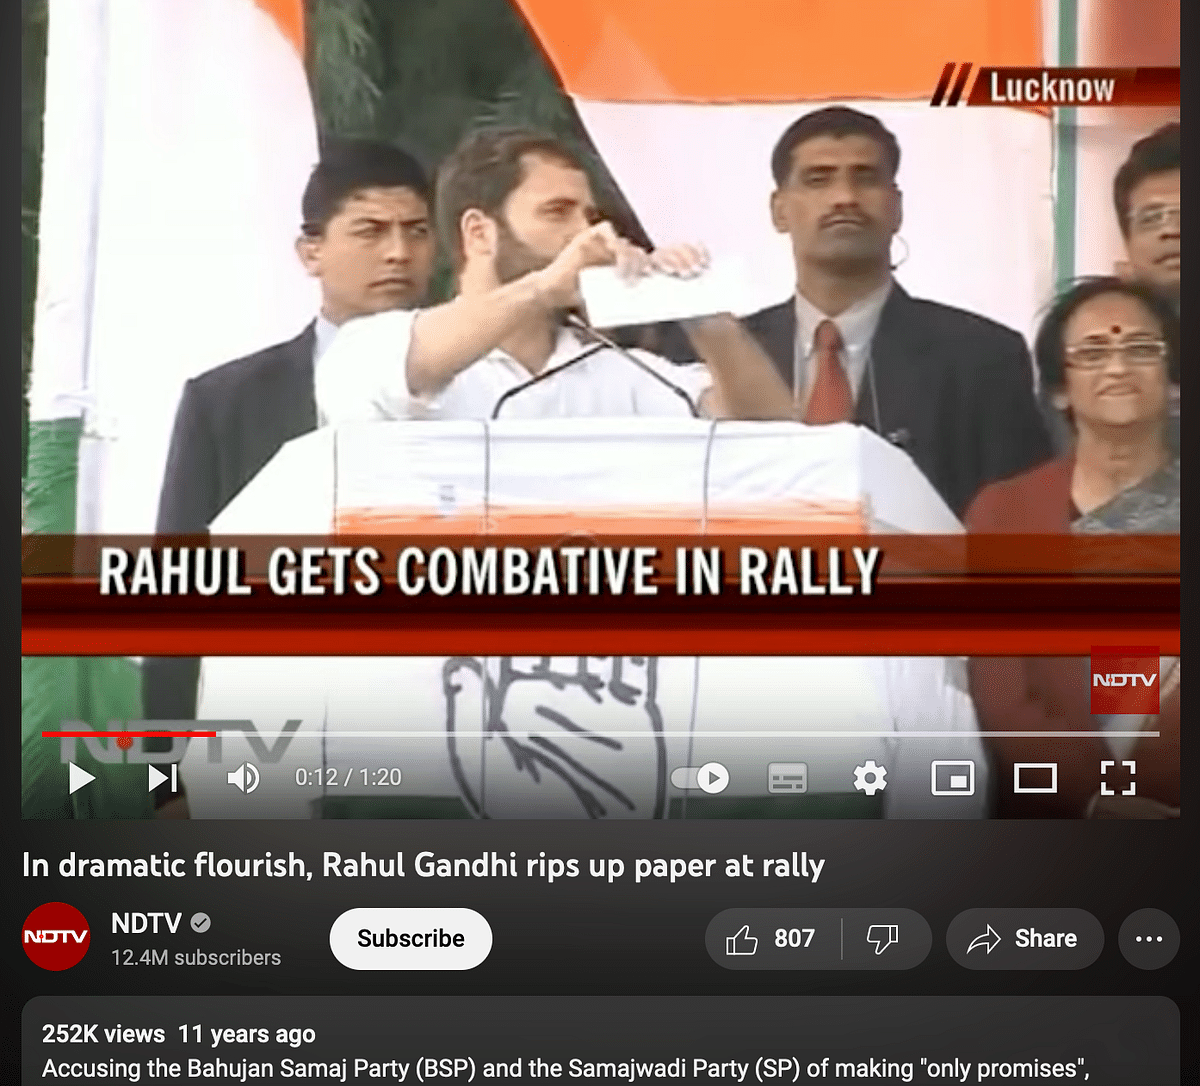 The image is from 2012 and shows Rahul Gandhi tearing up a piece of paper with poll promises made by SP and BSP.